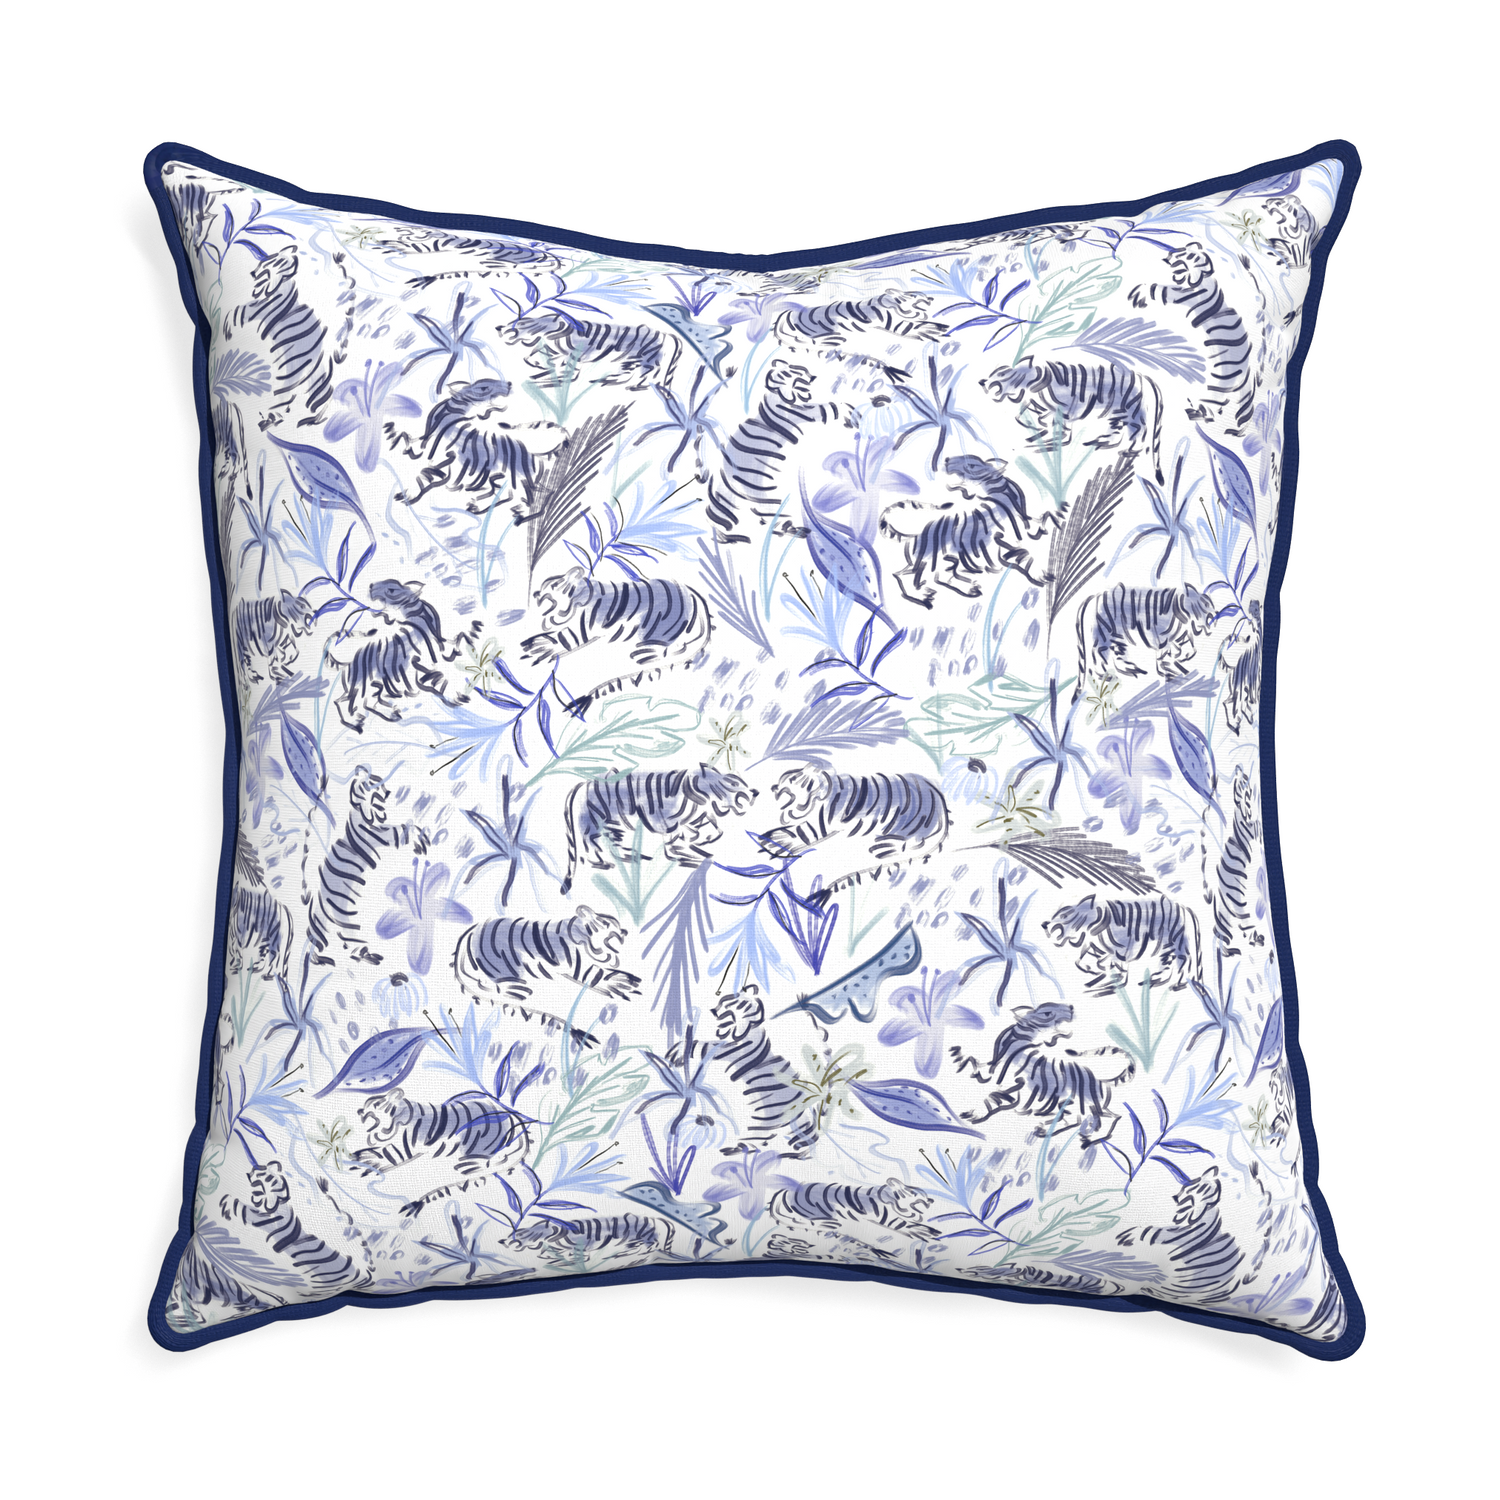 Euro-sham frida blue custom blue with intricate tiger designpillow with midnight piping on white background